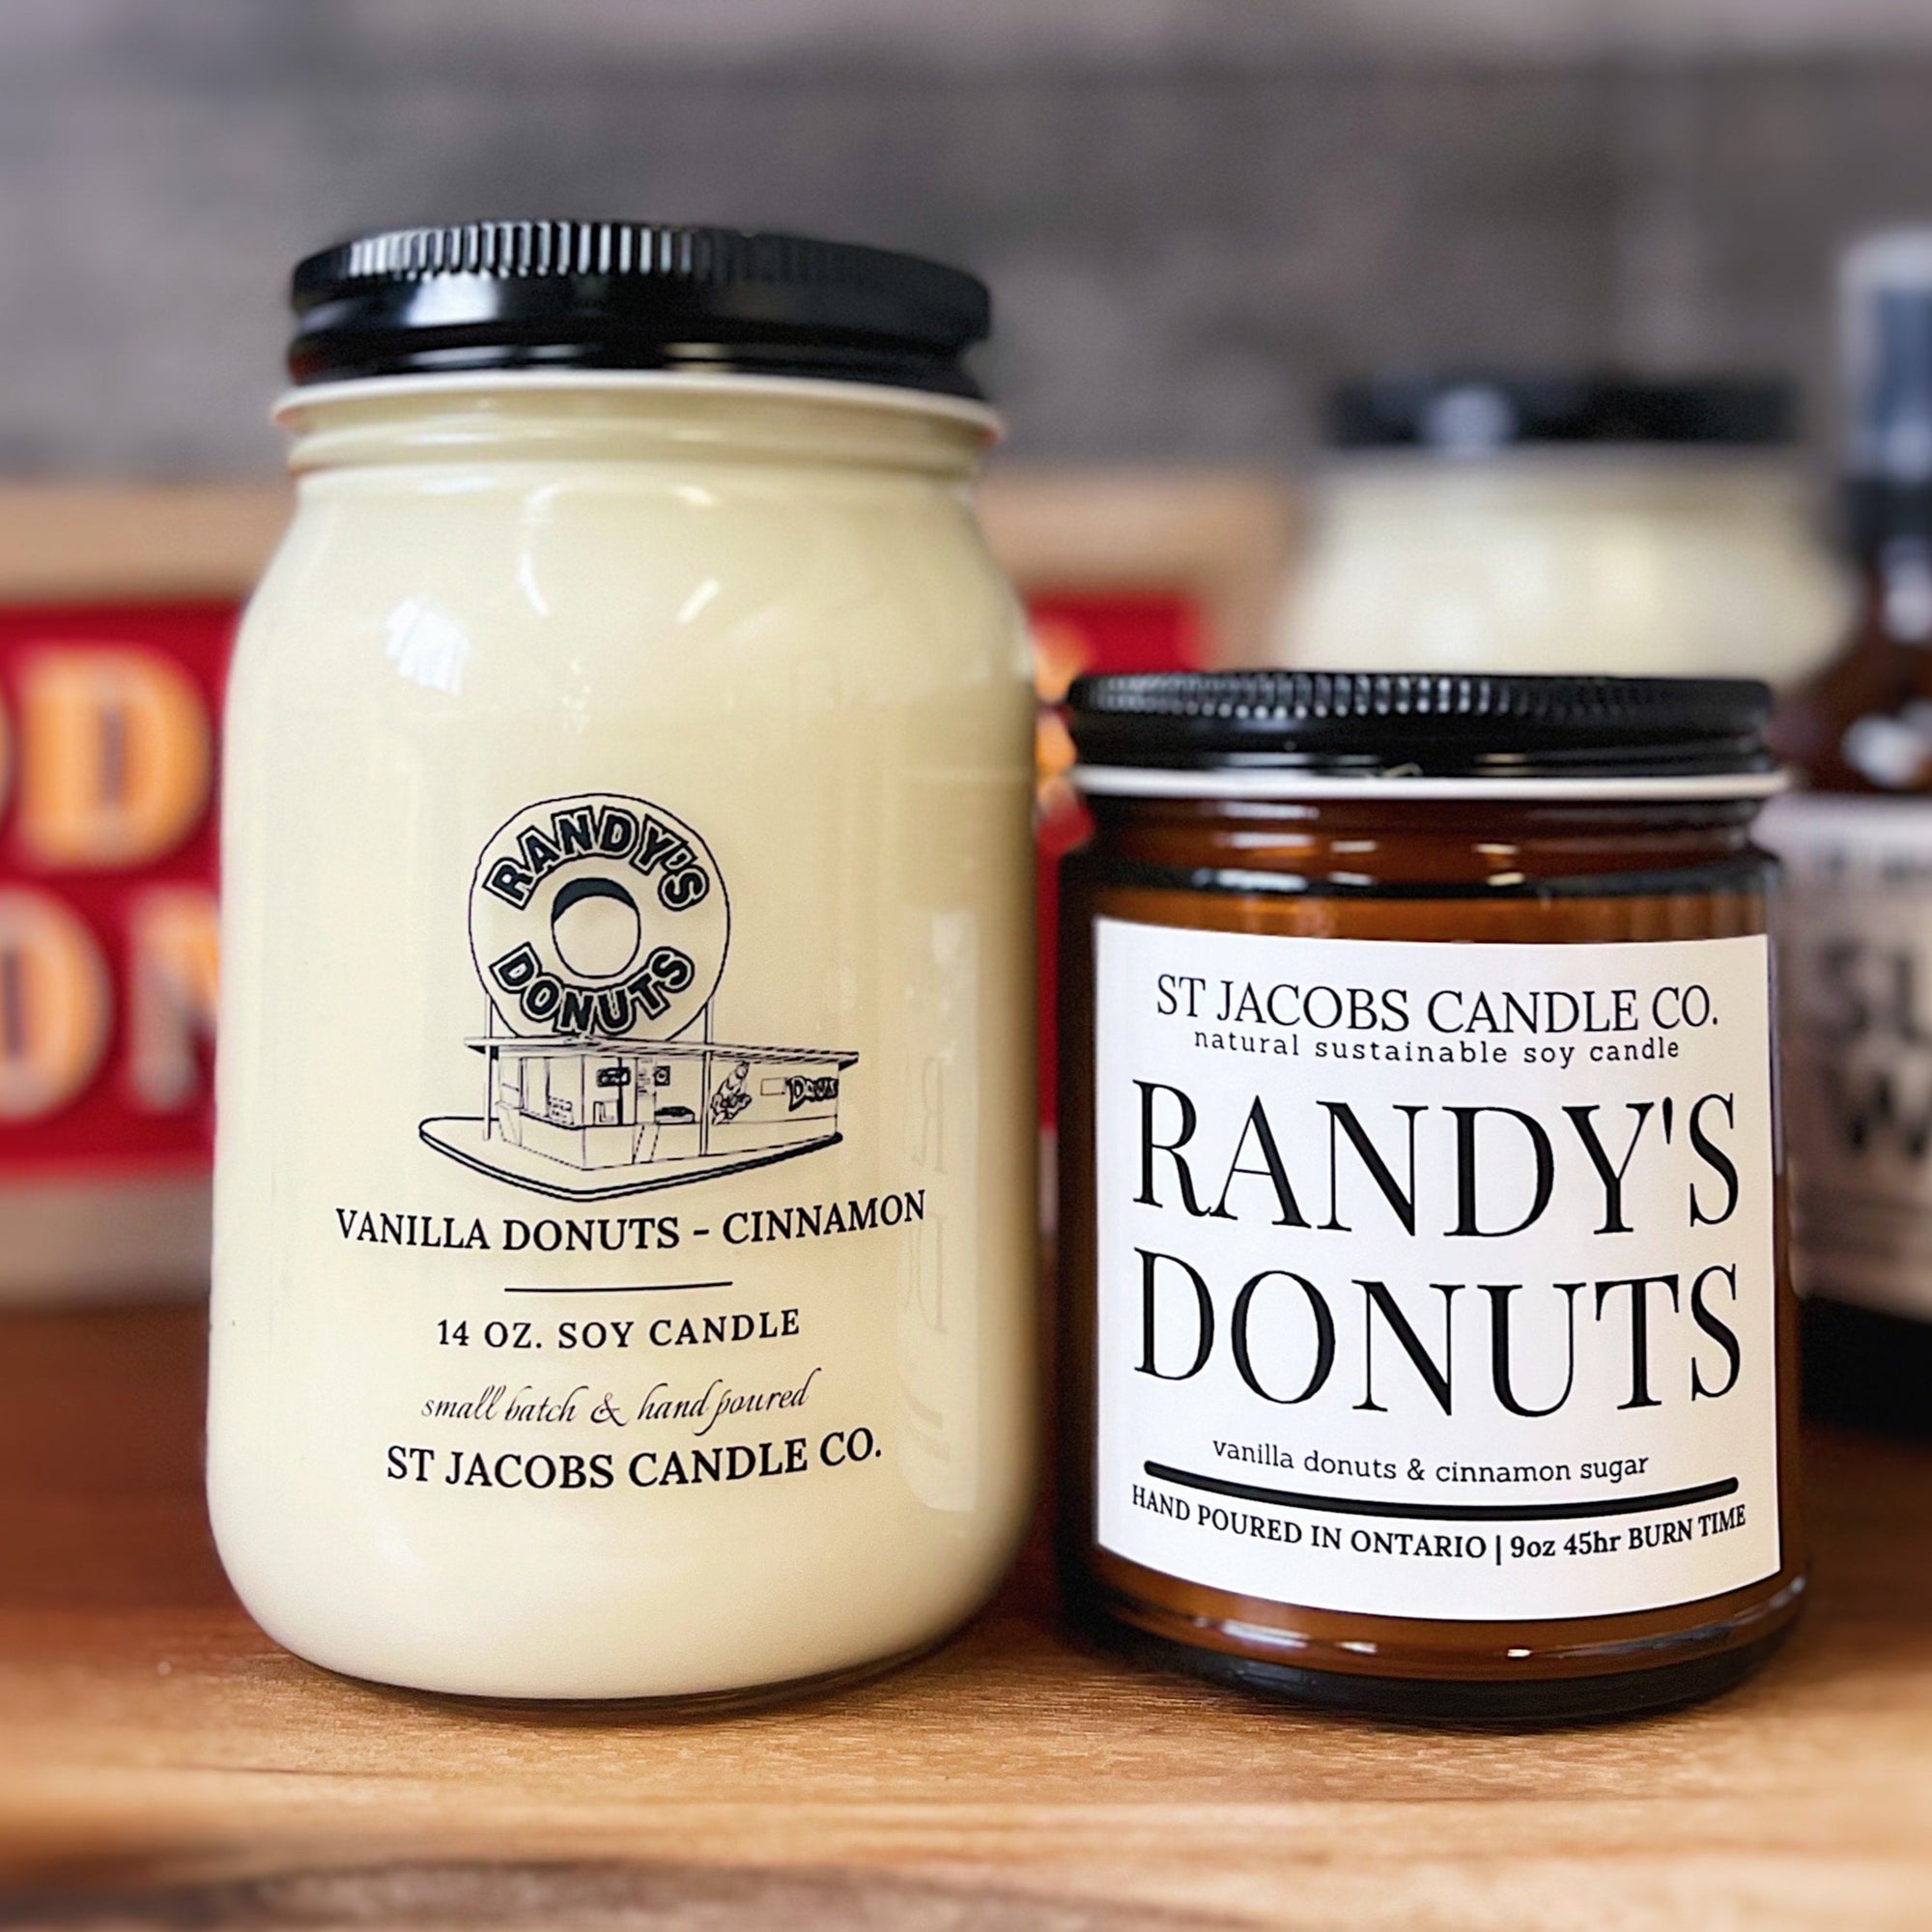 "RANDY'S DONUTS" Natural Soy Candle